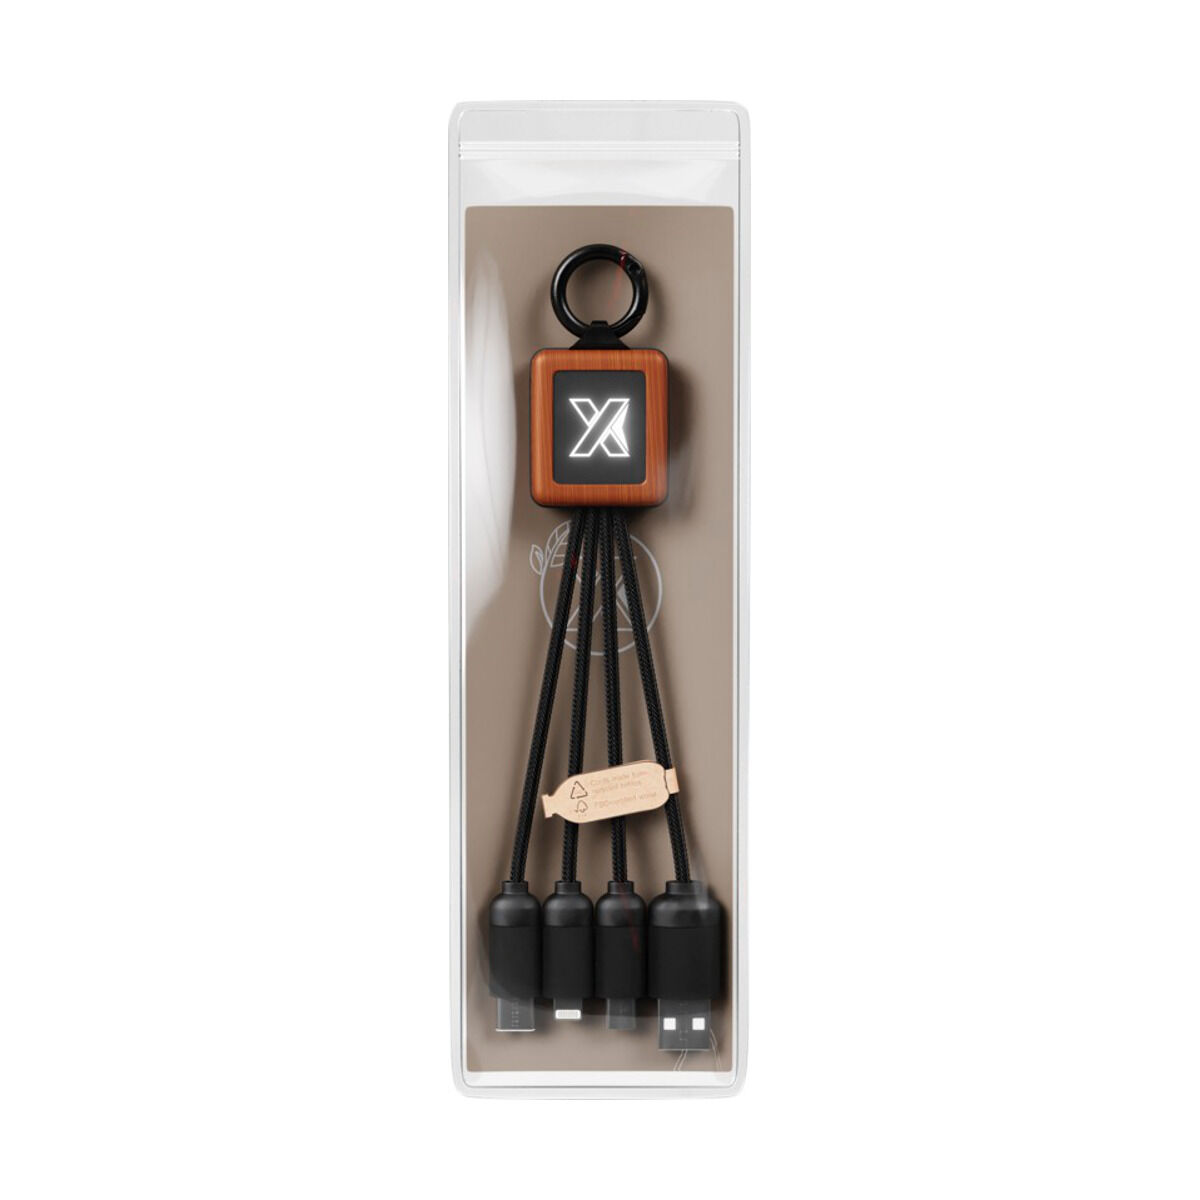 3-in-1 wooden cable with light-up logo (packaging)